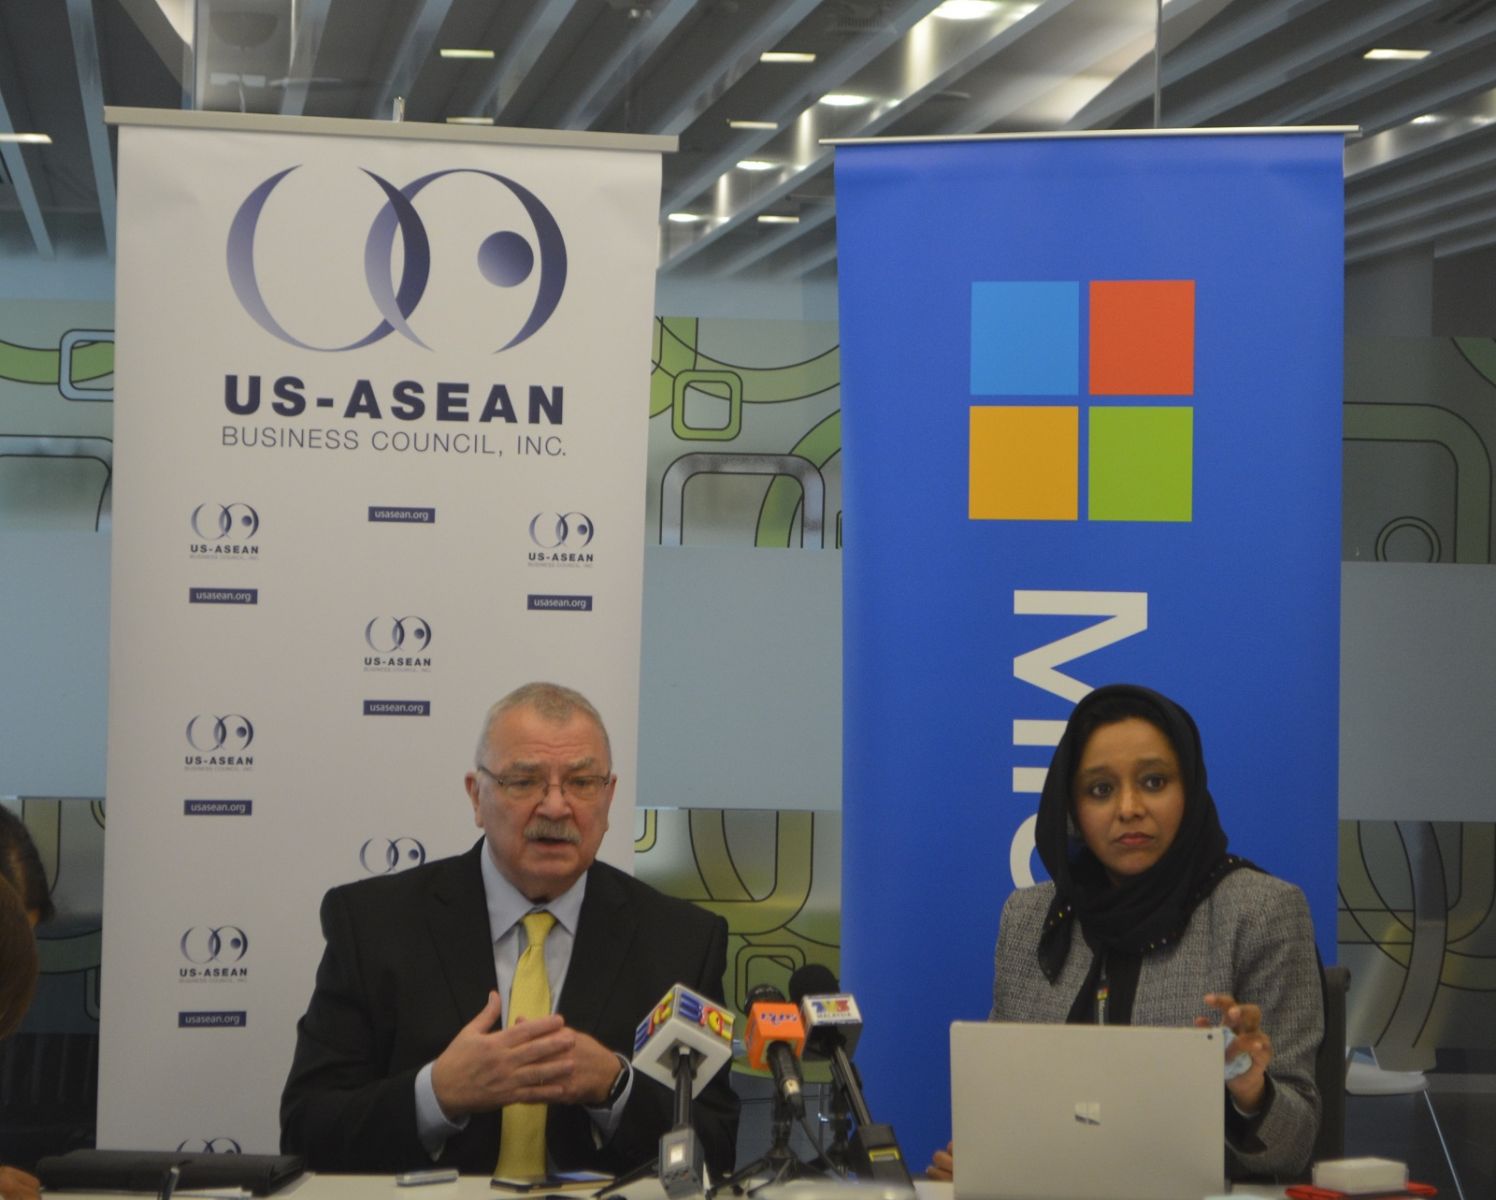 Common regulations key to driving digital economy in Asean